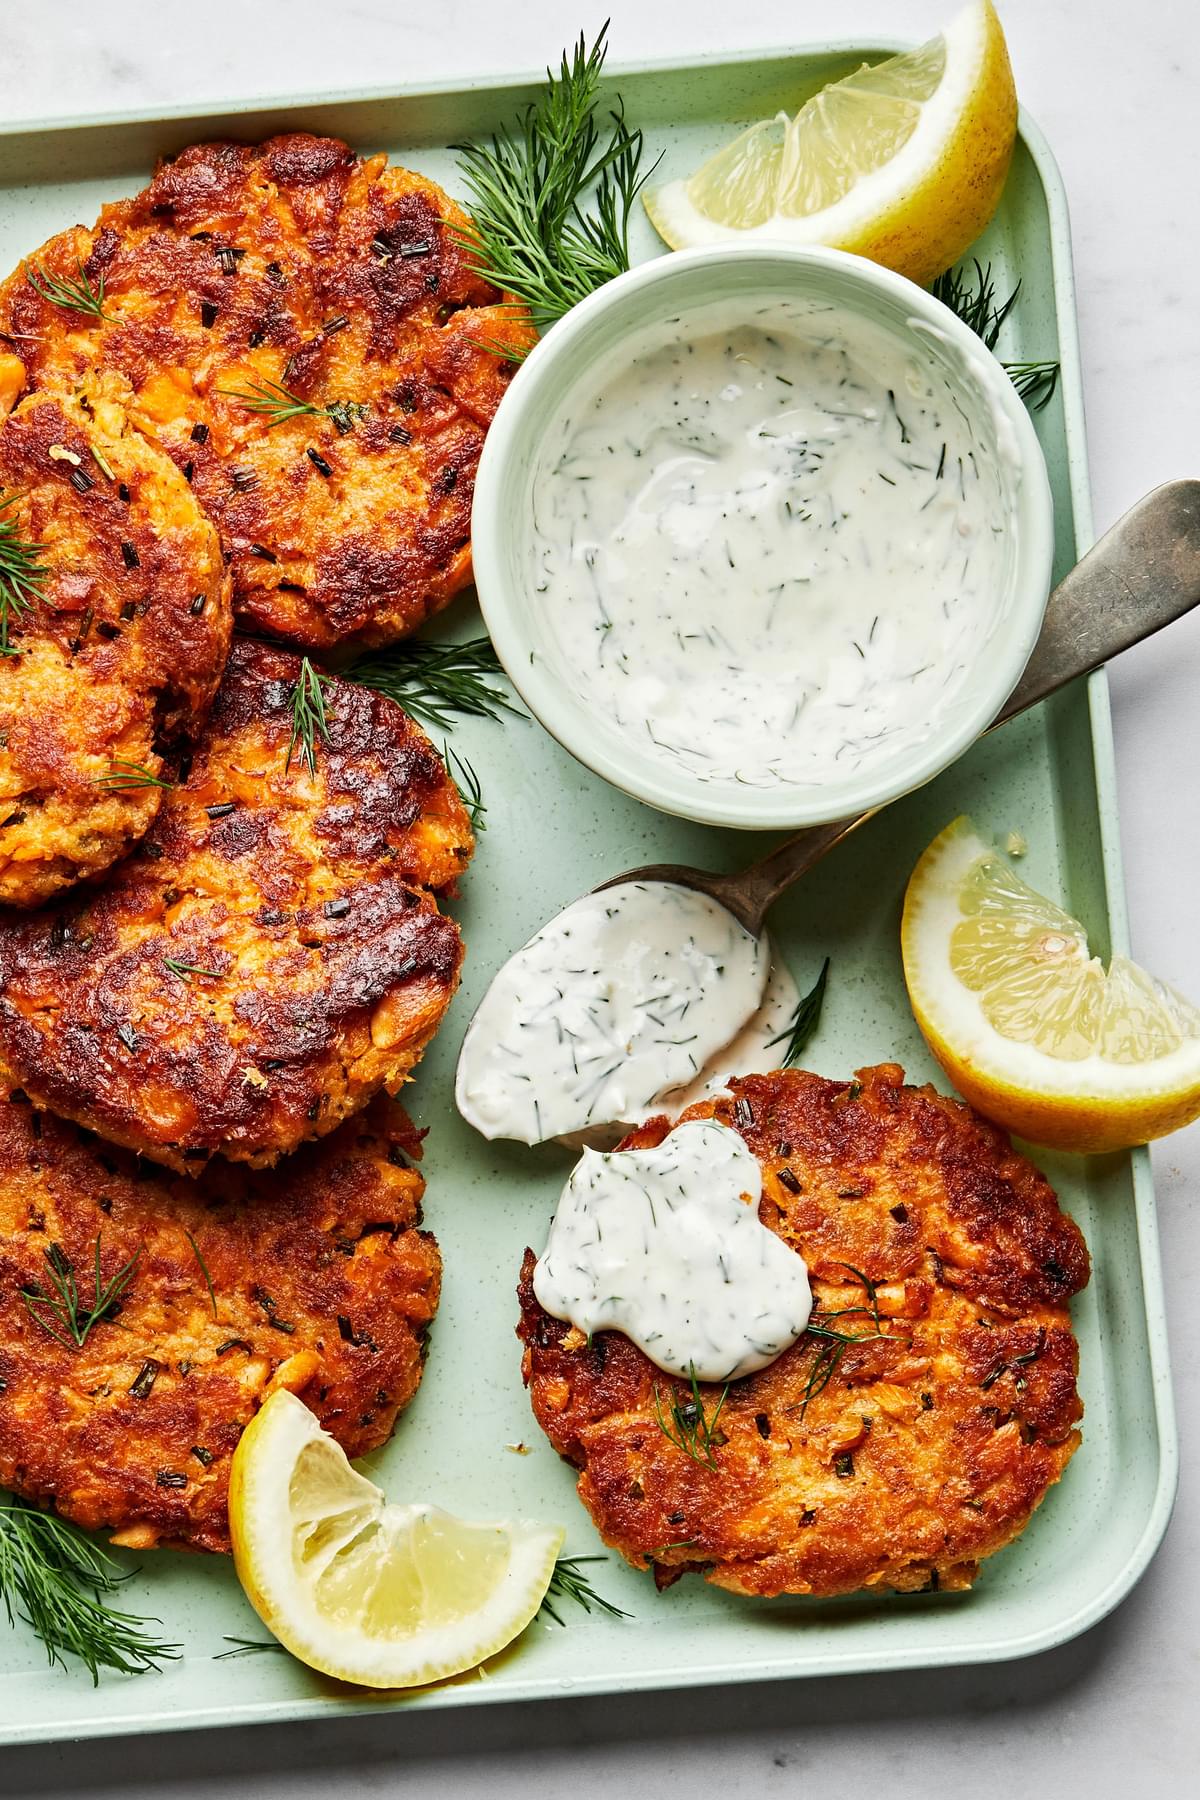 homemade salmon patties on a platter with a bowl of homemade dill dip and lemon wedges for serving